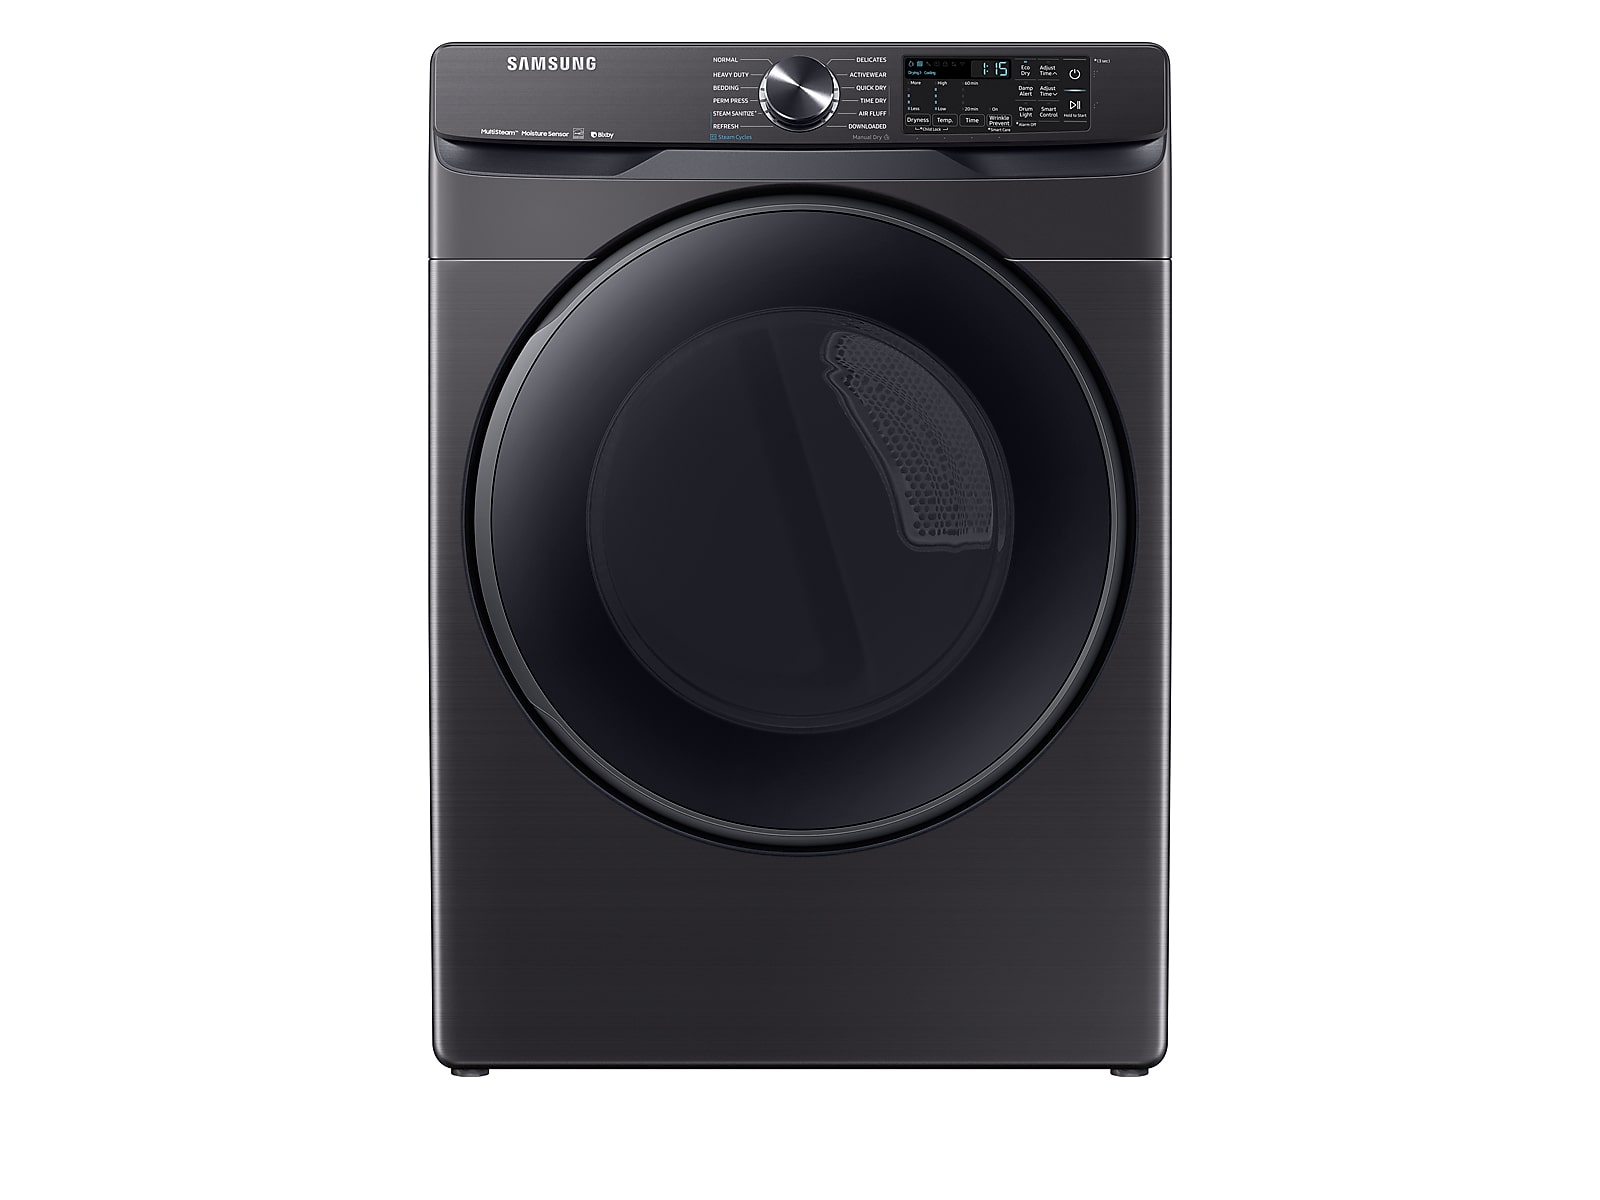 Samsung 7.5 cu. ft. Smart Electric Dryer with Steam Sanitize+ in Black Stainless Steel(DVE50R8500V/A3)